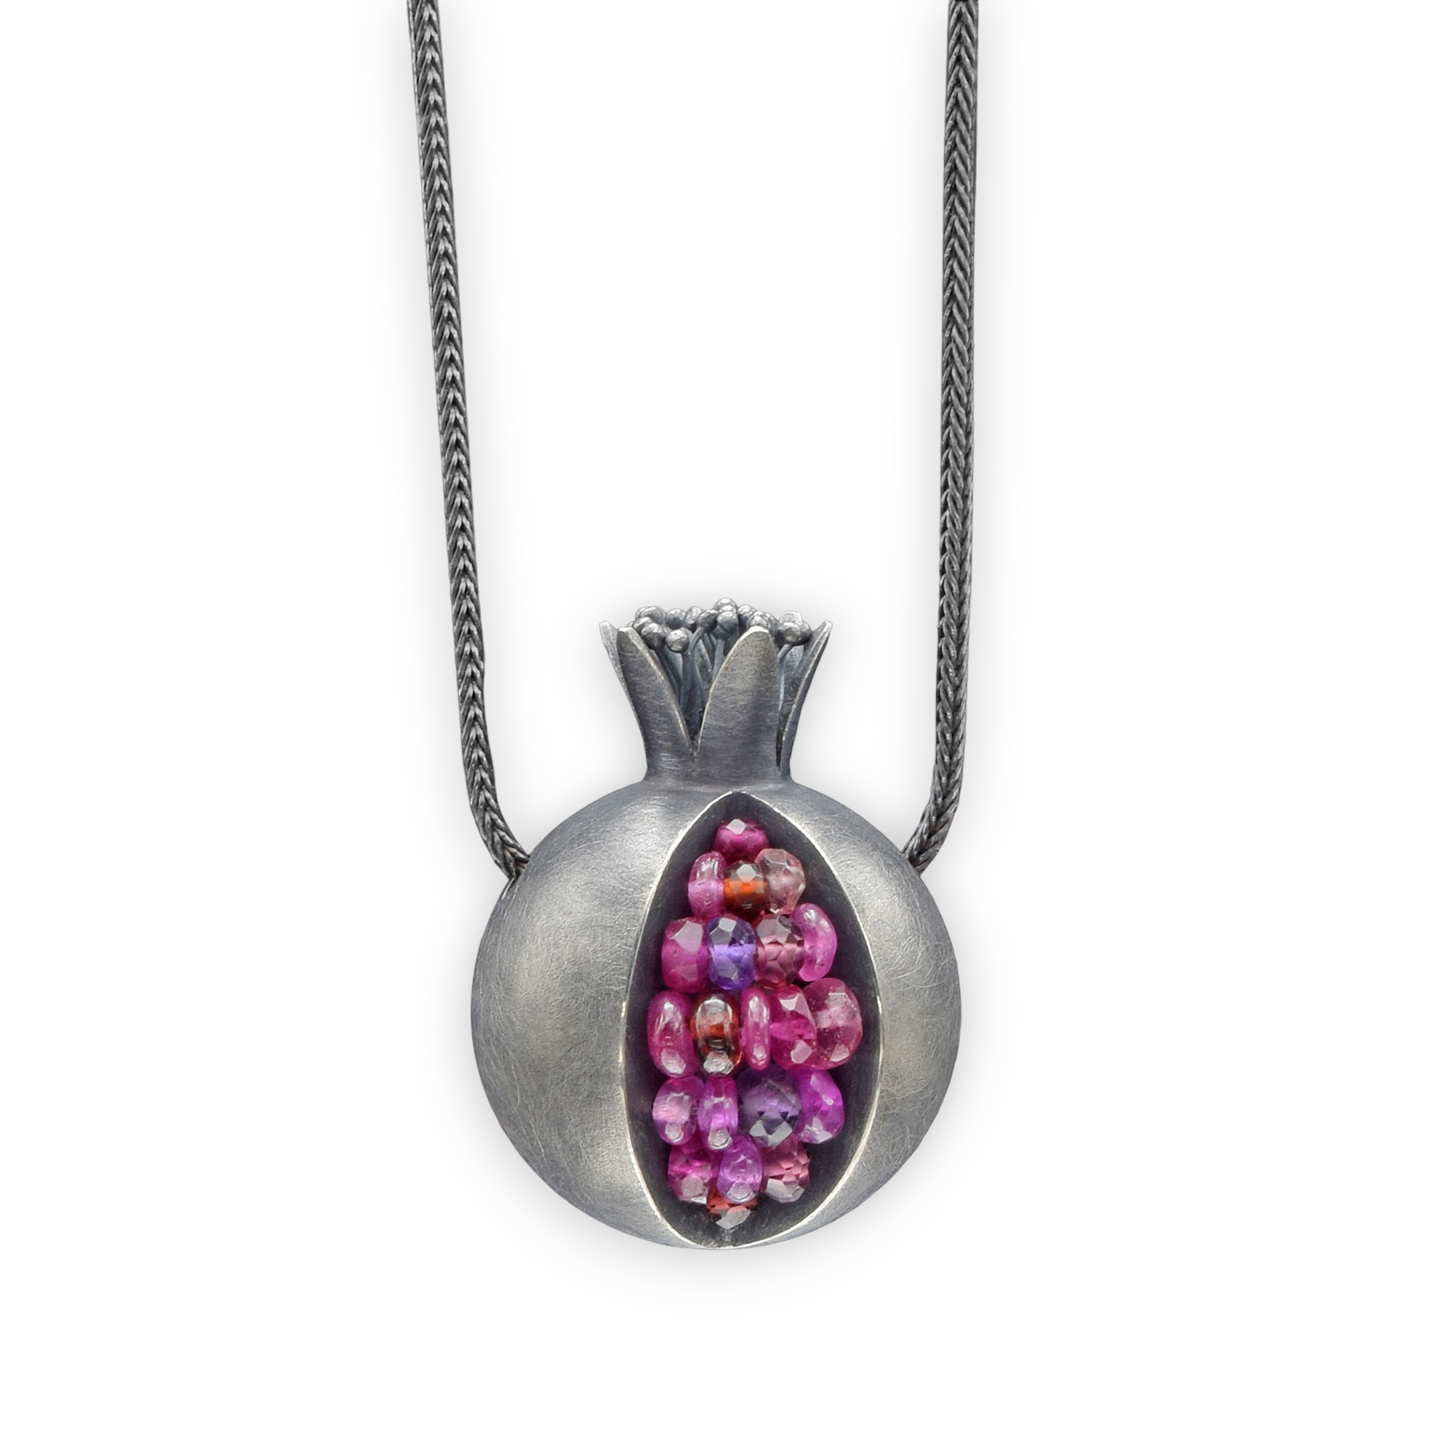 Oxidized Sterling Silver Pomegranate Pendant with Rubies, Garnets and Pink Sapphires